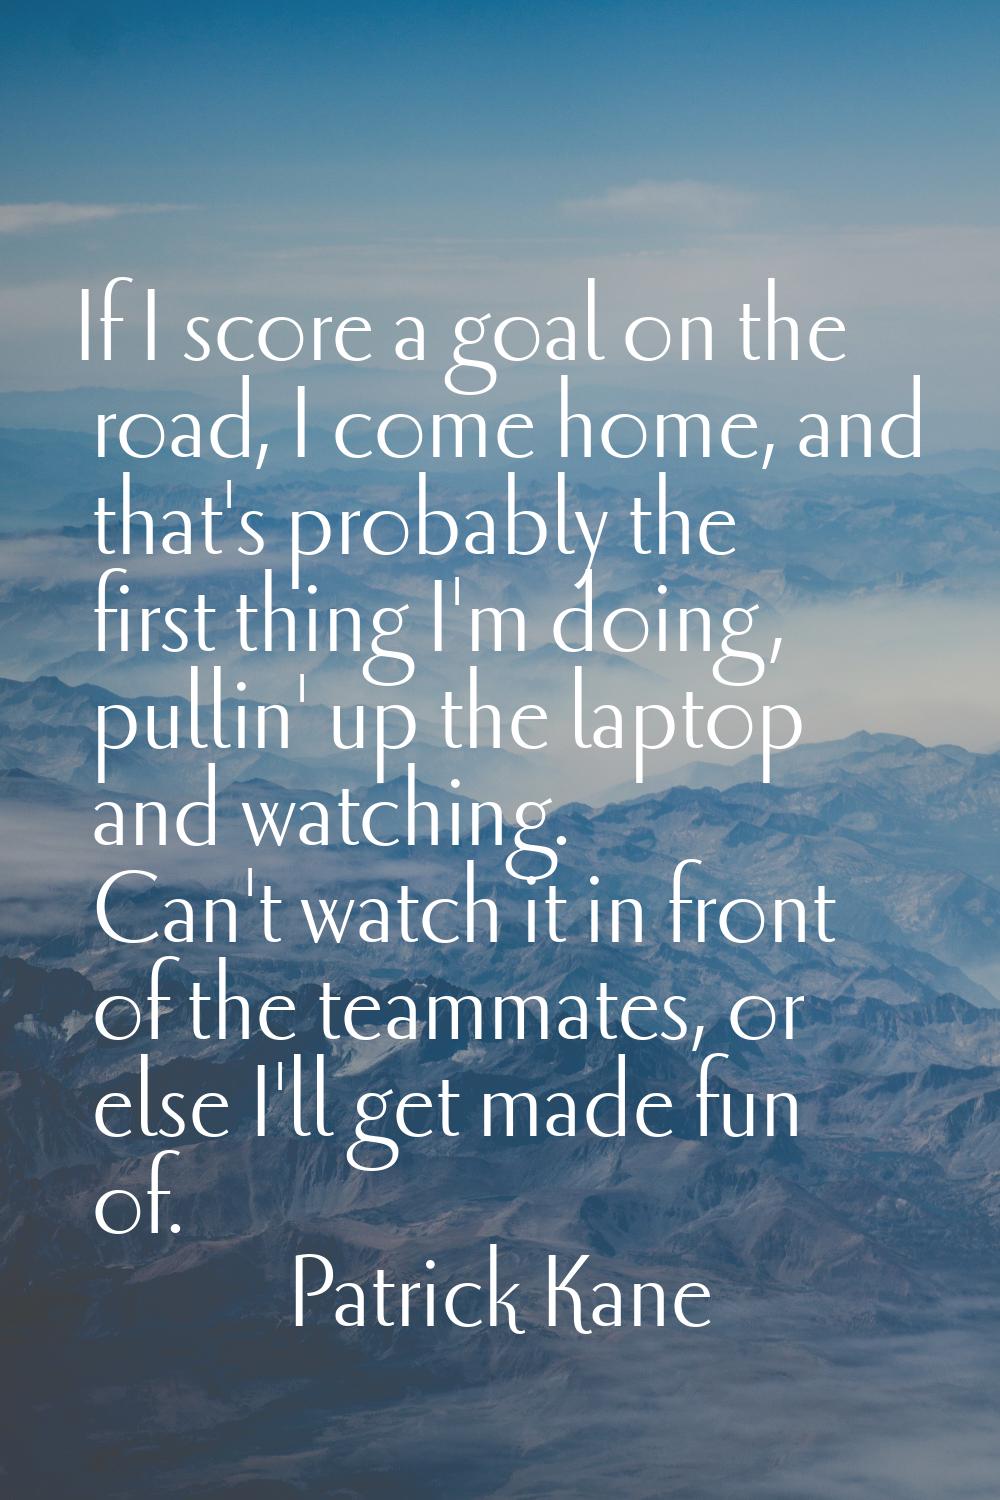 If I score a goal on the road, I come home, and that's probably the first thing I'm doing, pullin' 